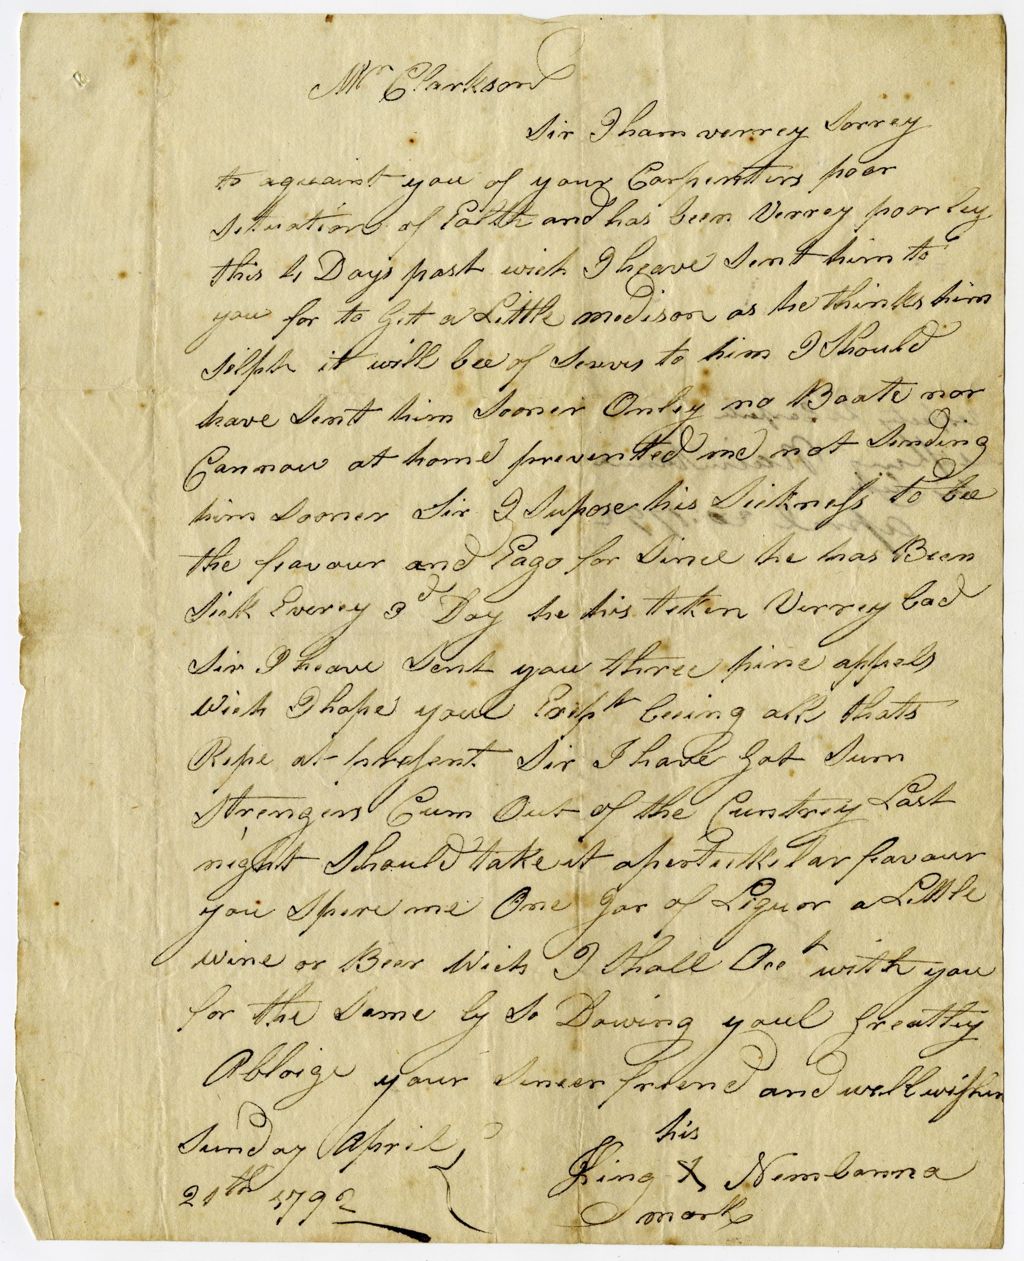 Miniature of Letter from King Naimbanna to John Clarkson, April 20, 1792